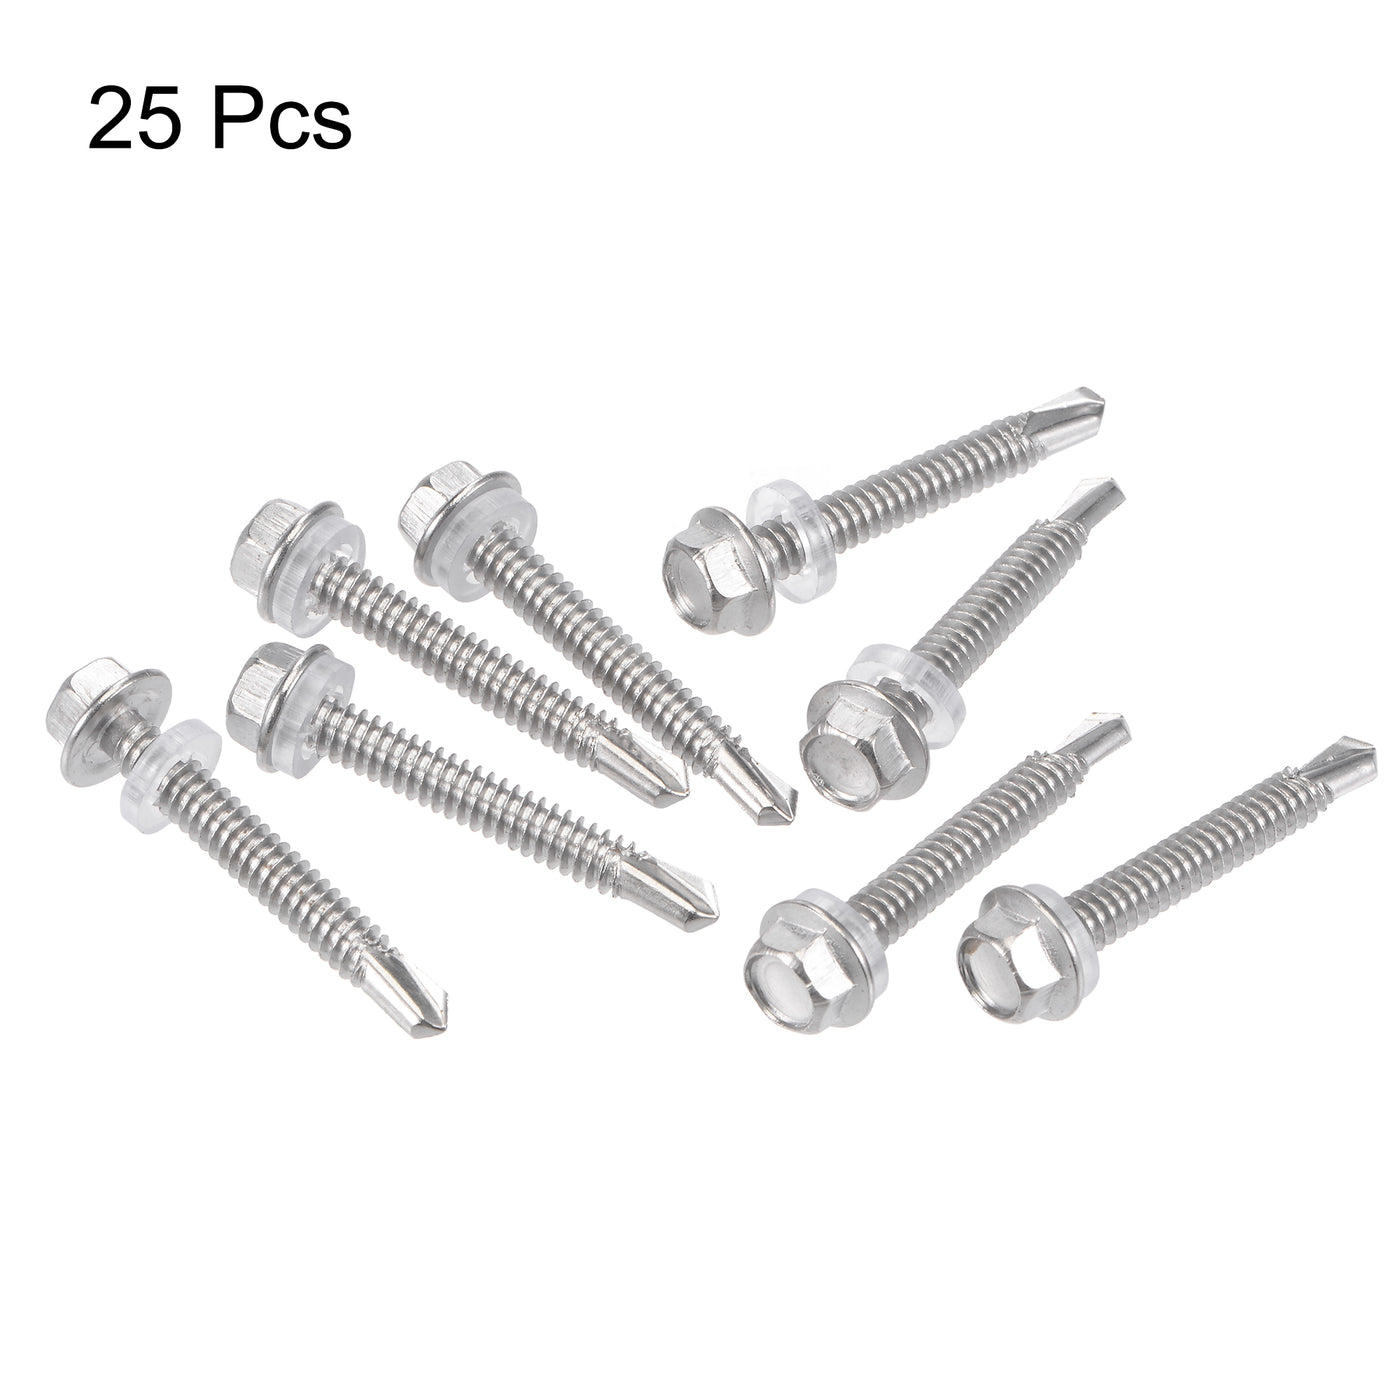 uxcell Uxcell #12 x 1 1/2" 410 Stainless Steel Hex Washer Head Self Drilling Screws 25pcs